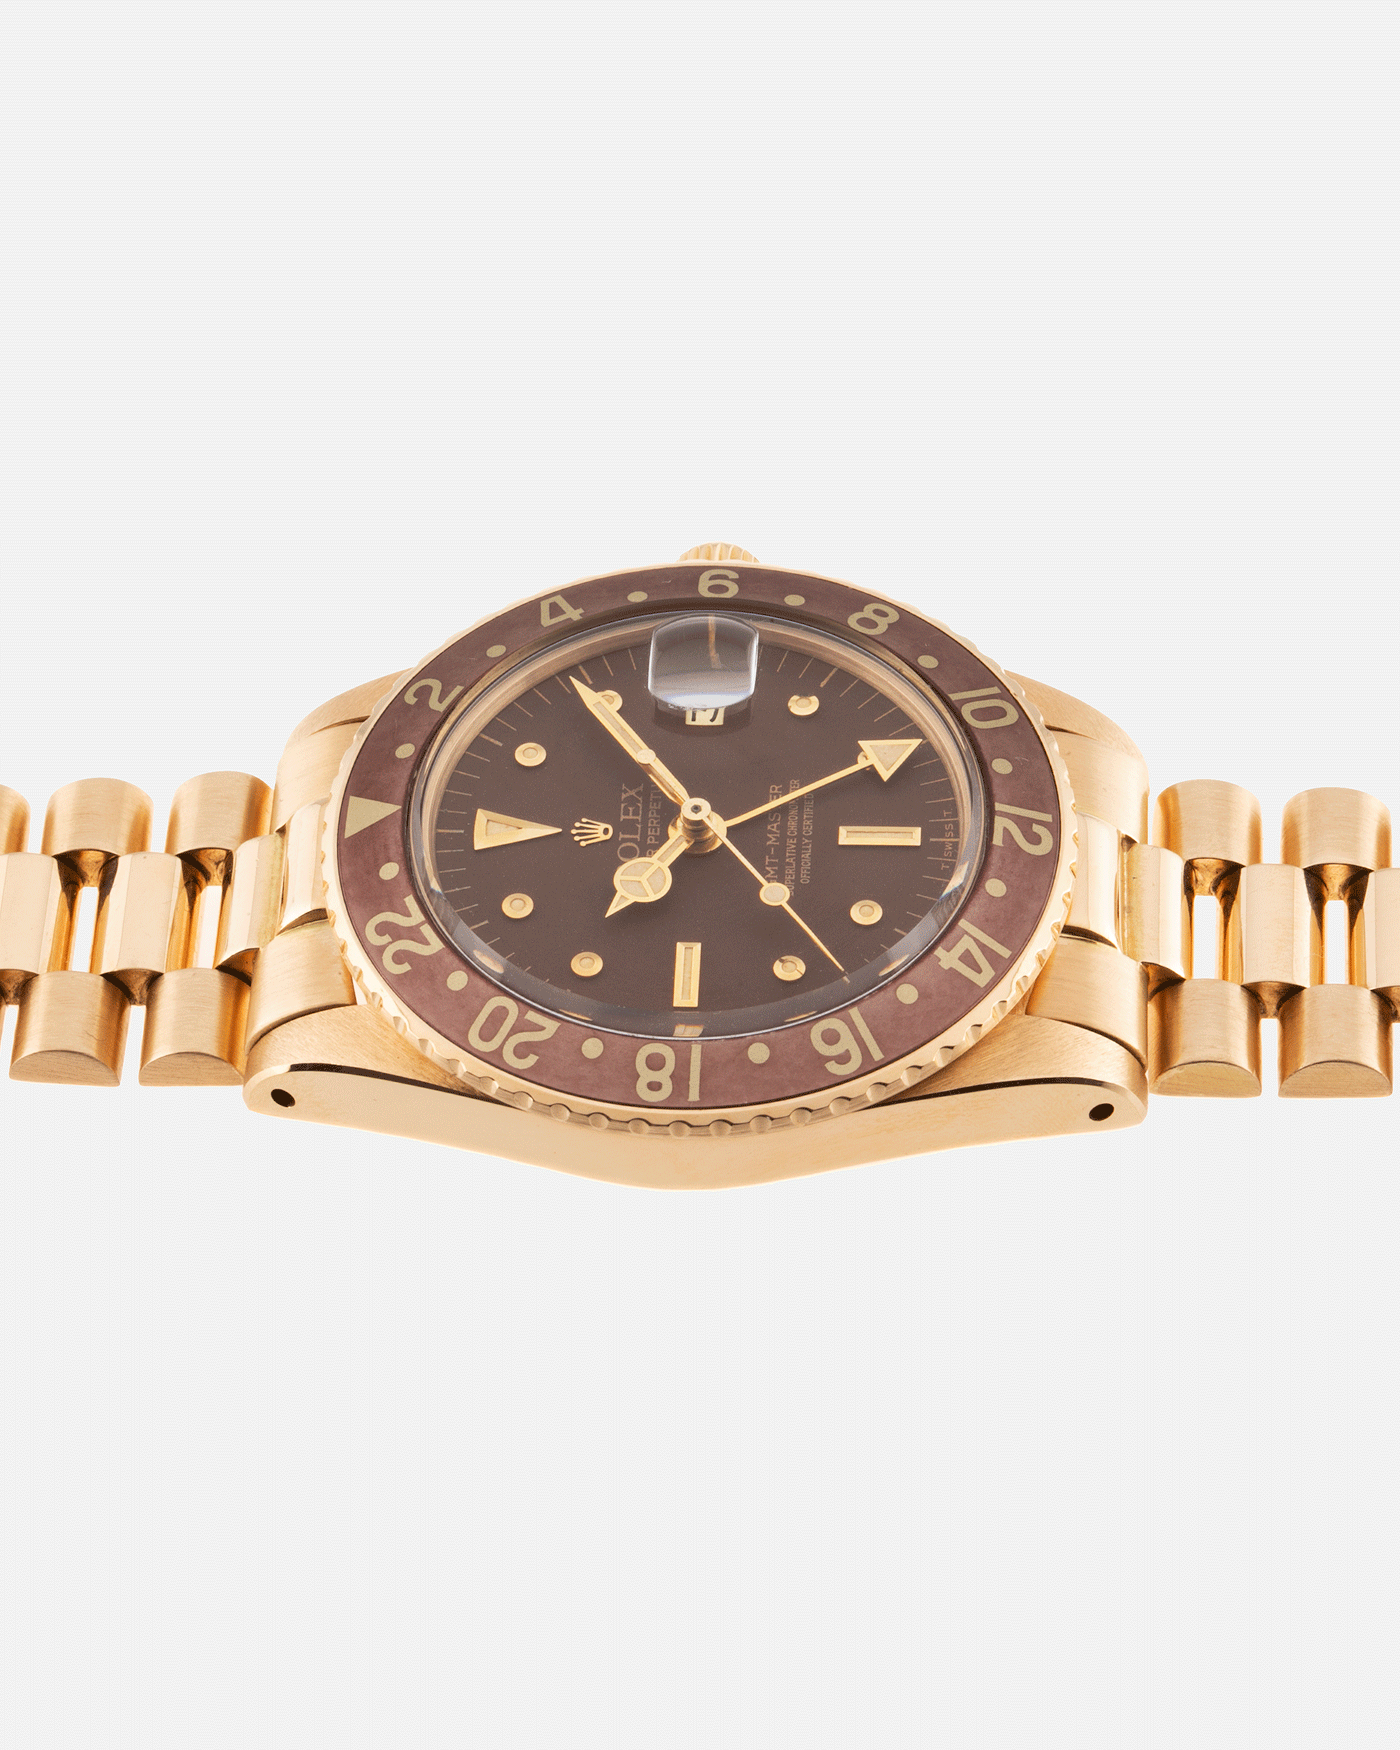 Brand: Rolex Year: 1978 Model: GMT-Master Reference Number: 1675 Serial Number: 5.3 mil Material: 18k Yellow Gold Movement: Cal. 1570 Case Diameter: 40mm Lug Width: 20mm Strap: 18k Yellow Gold Rolex President Bracelet